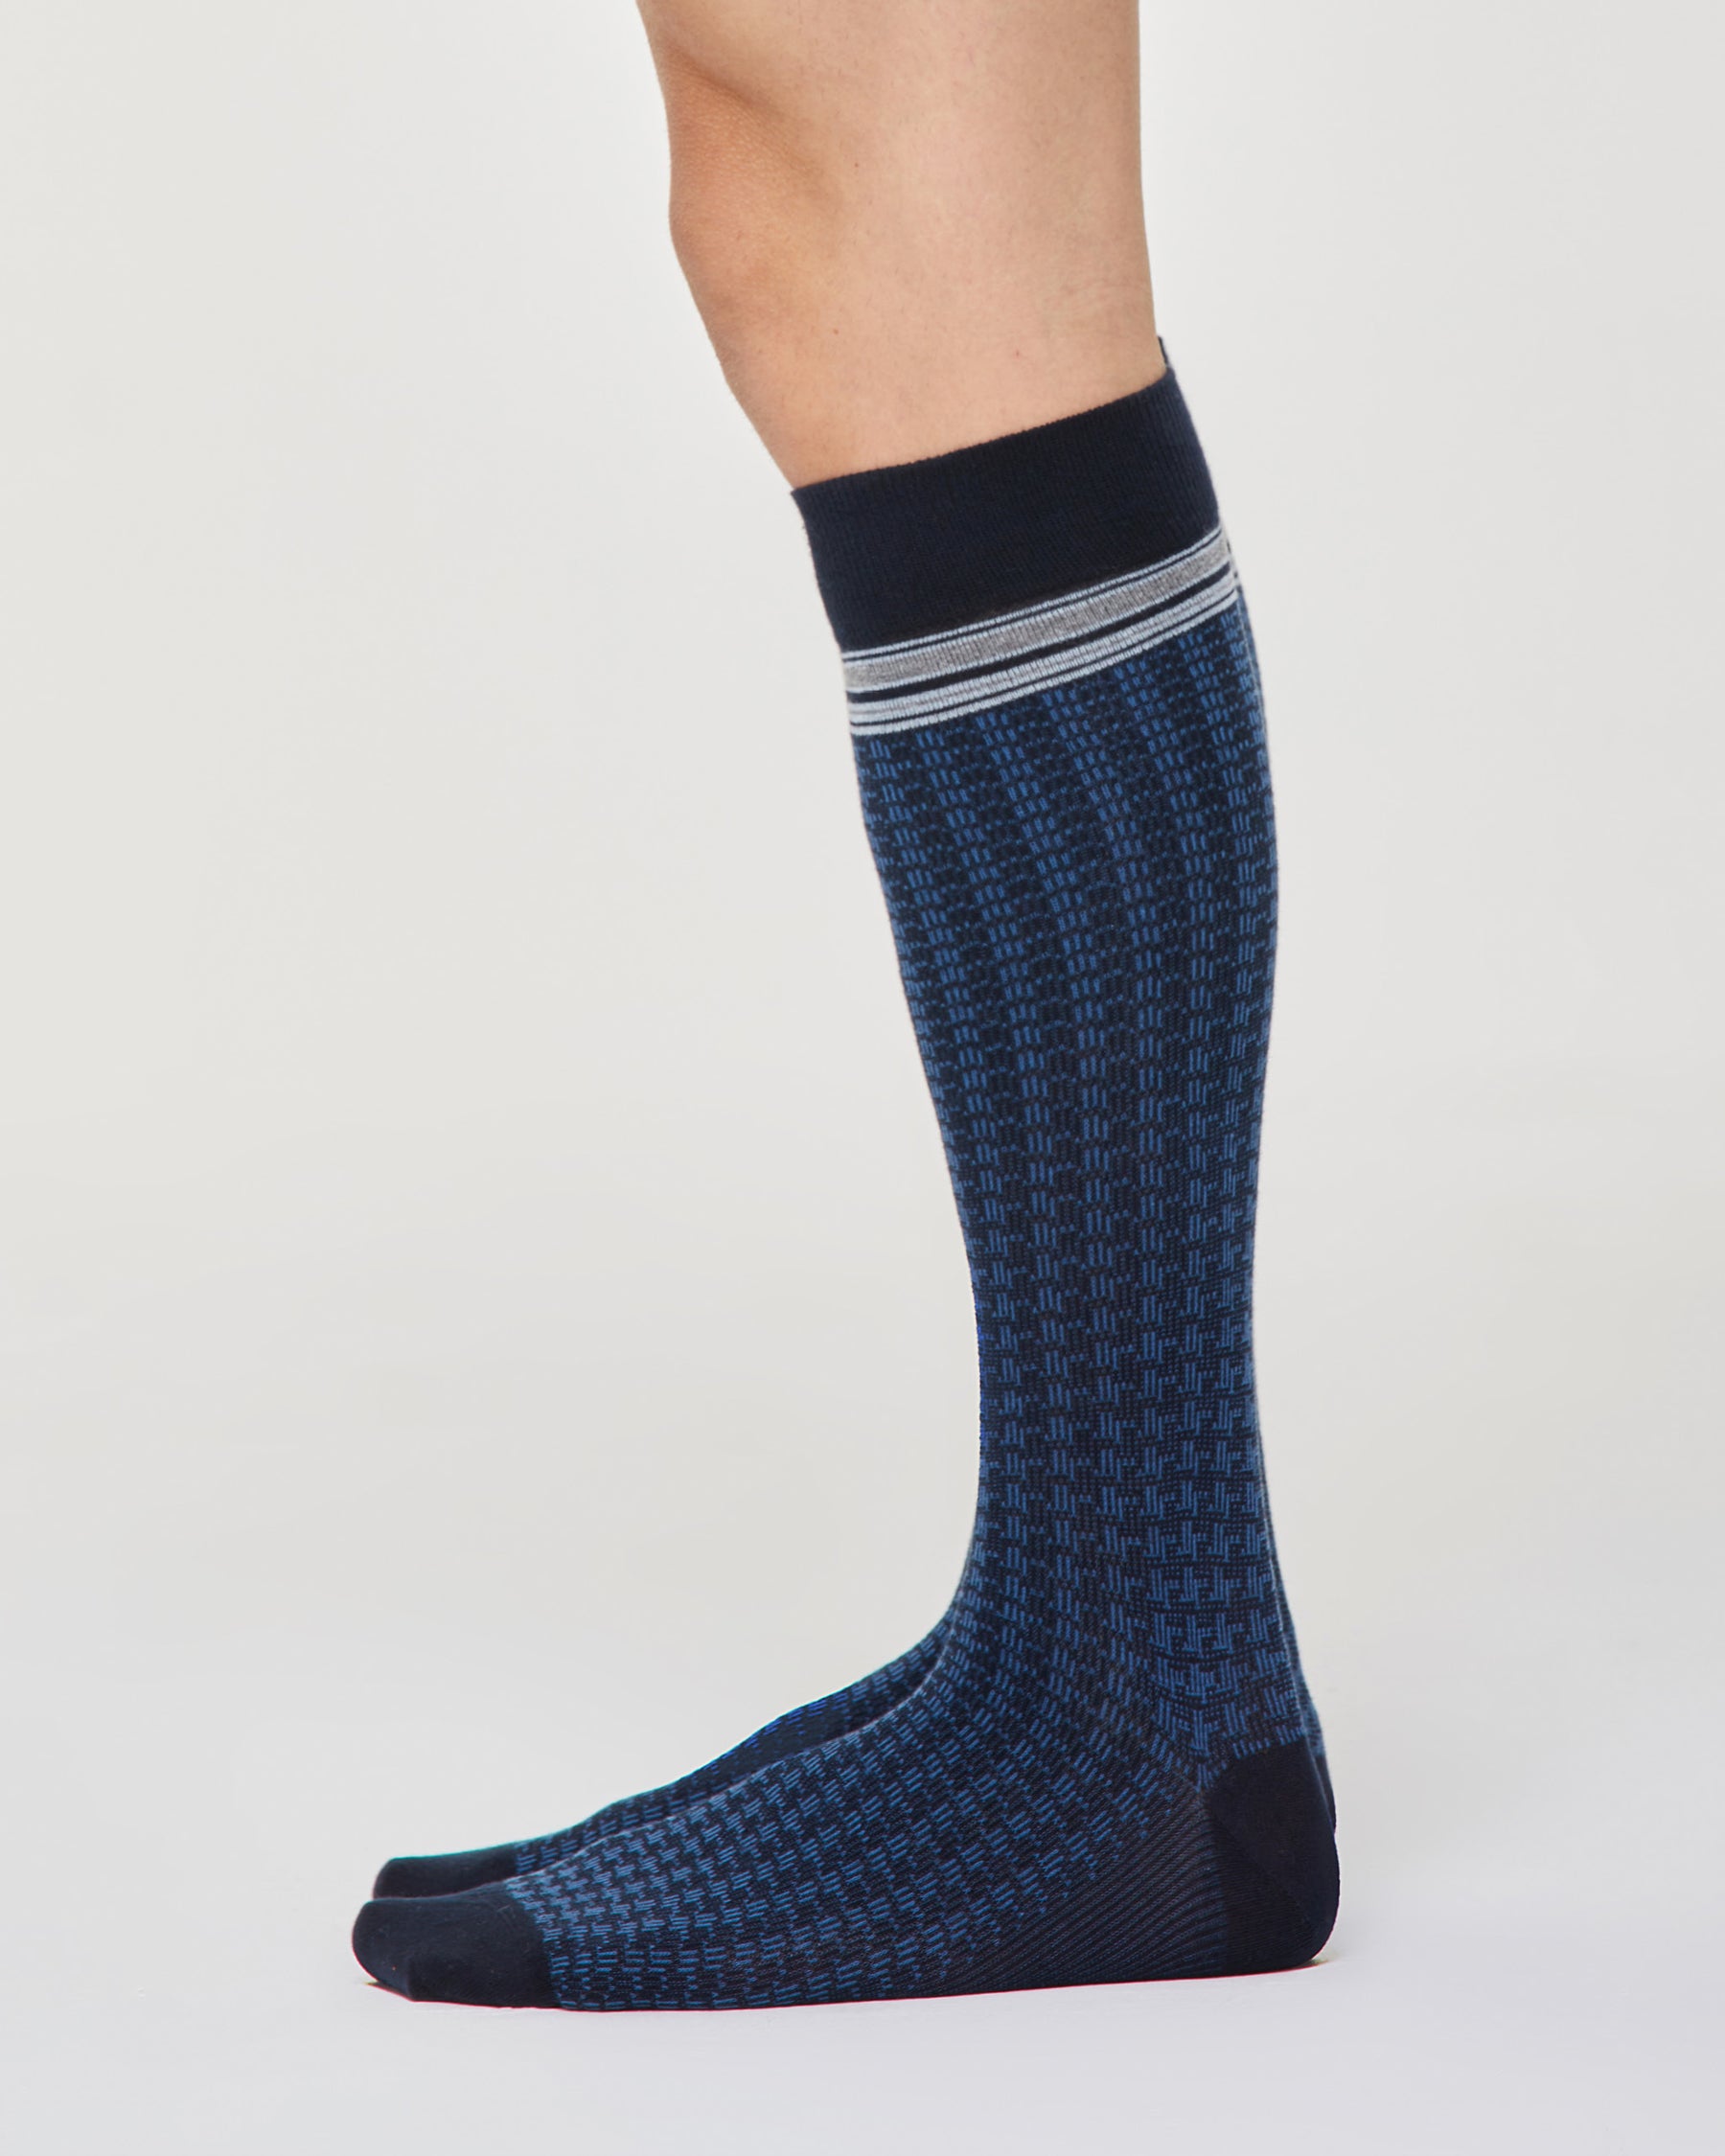 Eugenio cotton long sock with tie pattern